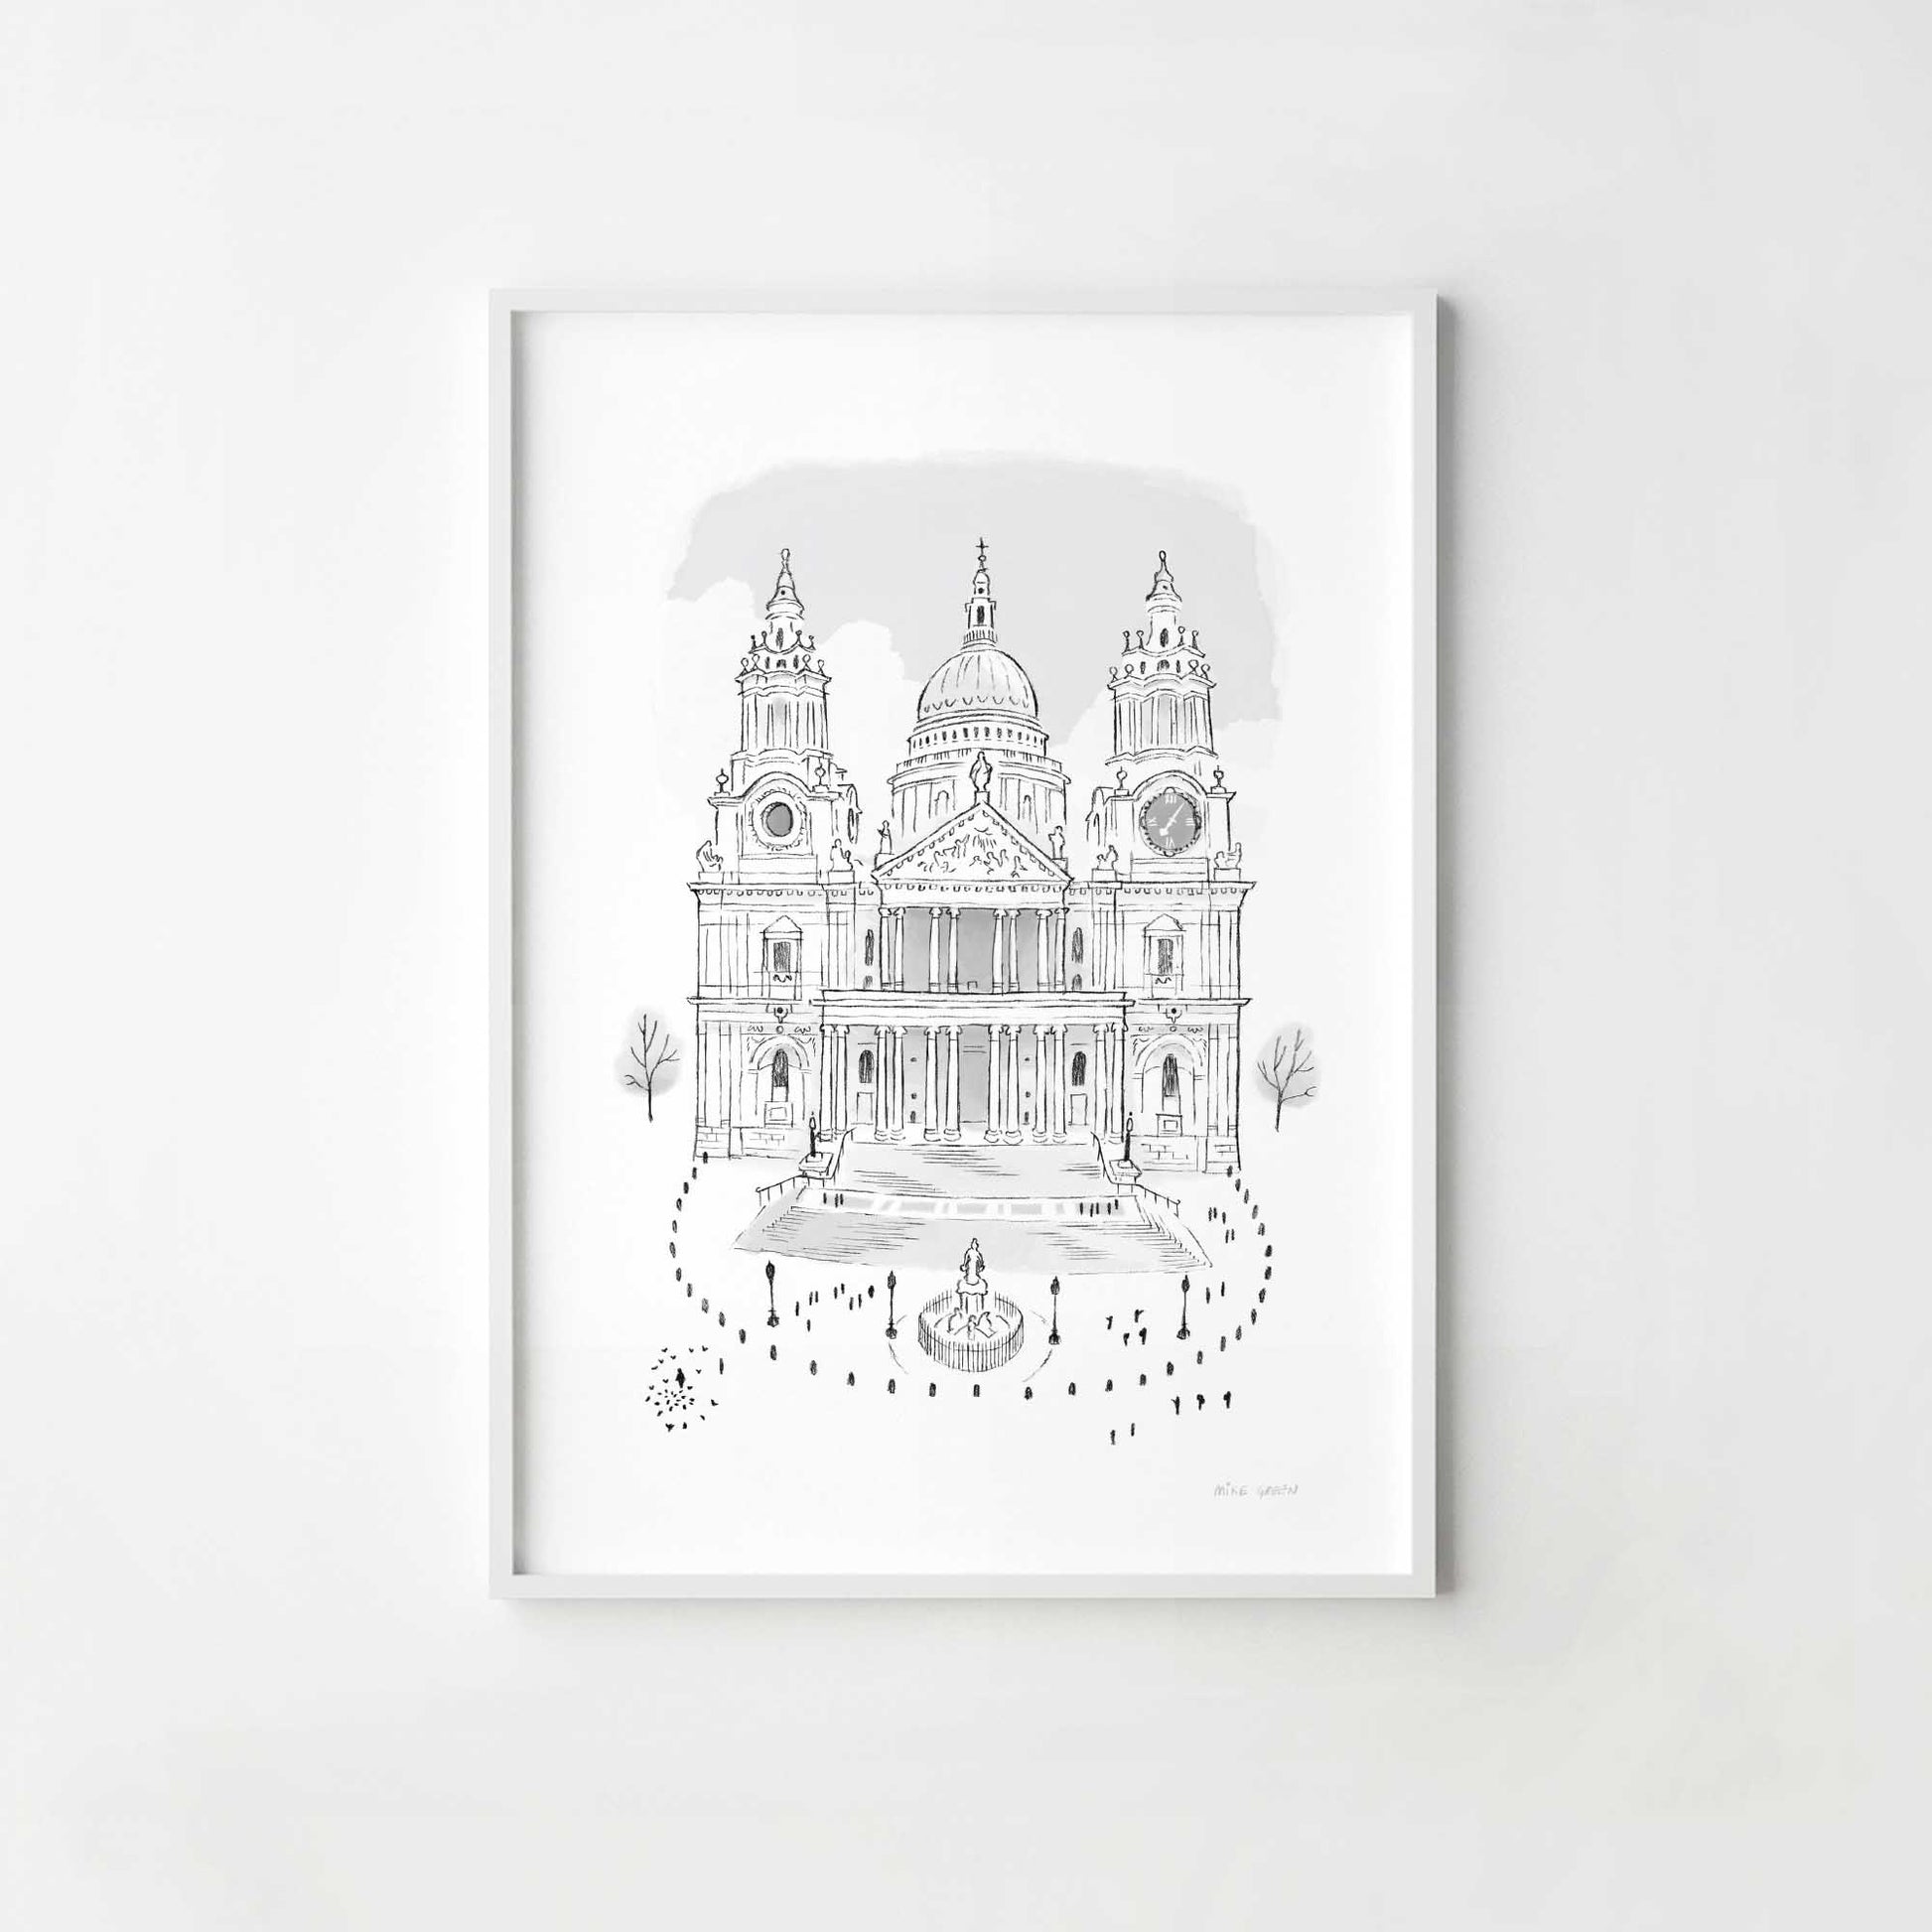 A print of London's St Pauls Cathedral in London beautifully sketched by Mike Green.